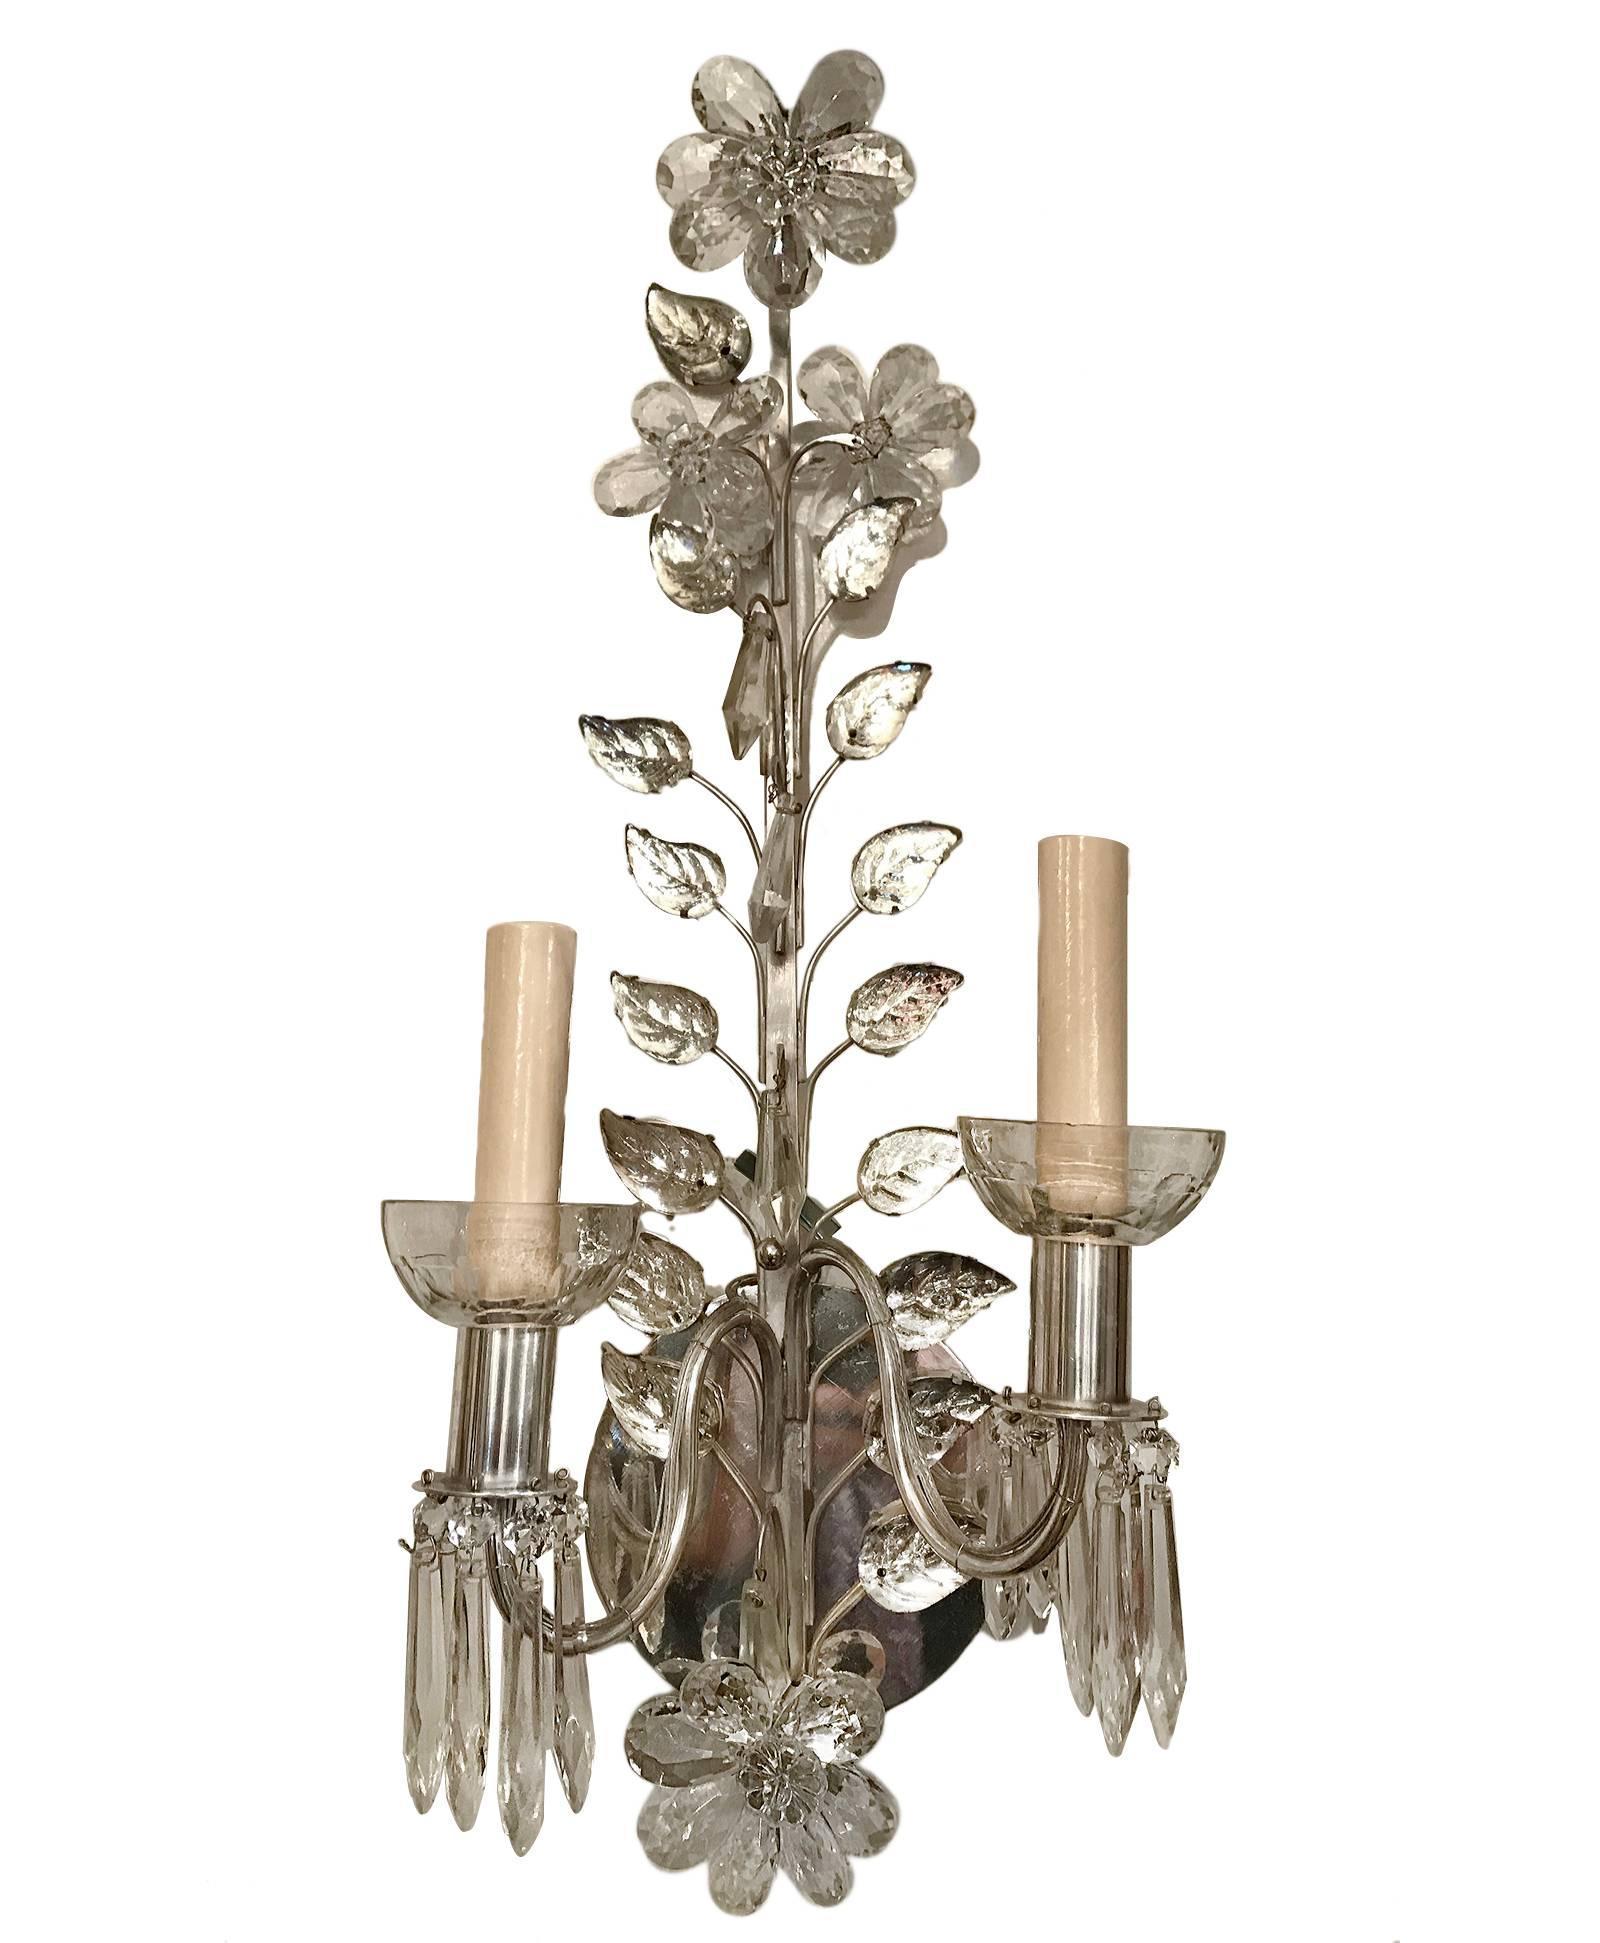 Set of four circa French 1940’s silver plated sconces with smoke-colored glass leaves and crystals flowers. 2 lights each. Sold per pair.

Measurements:
Height: 21.5?
Depth: 4?
Width: 8?.